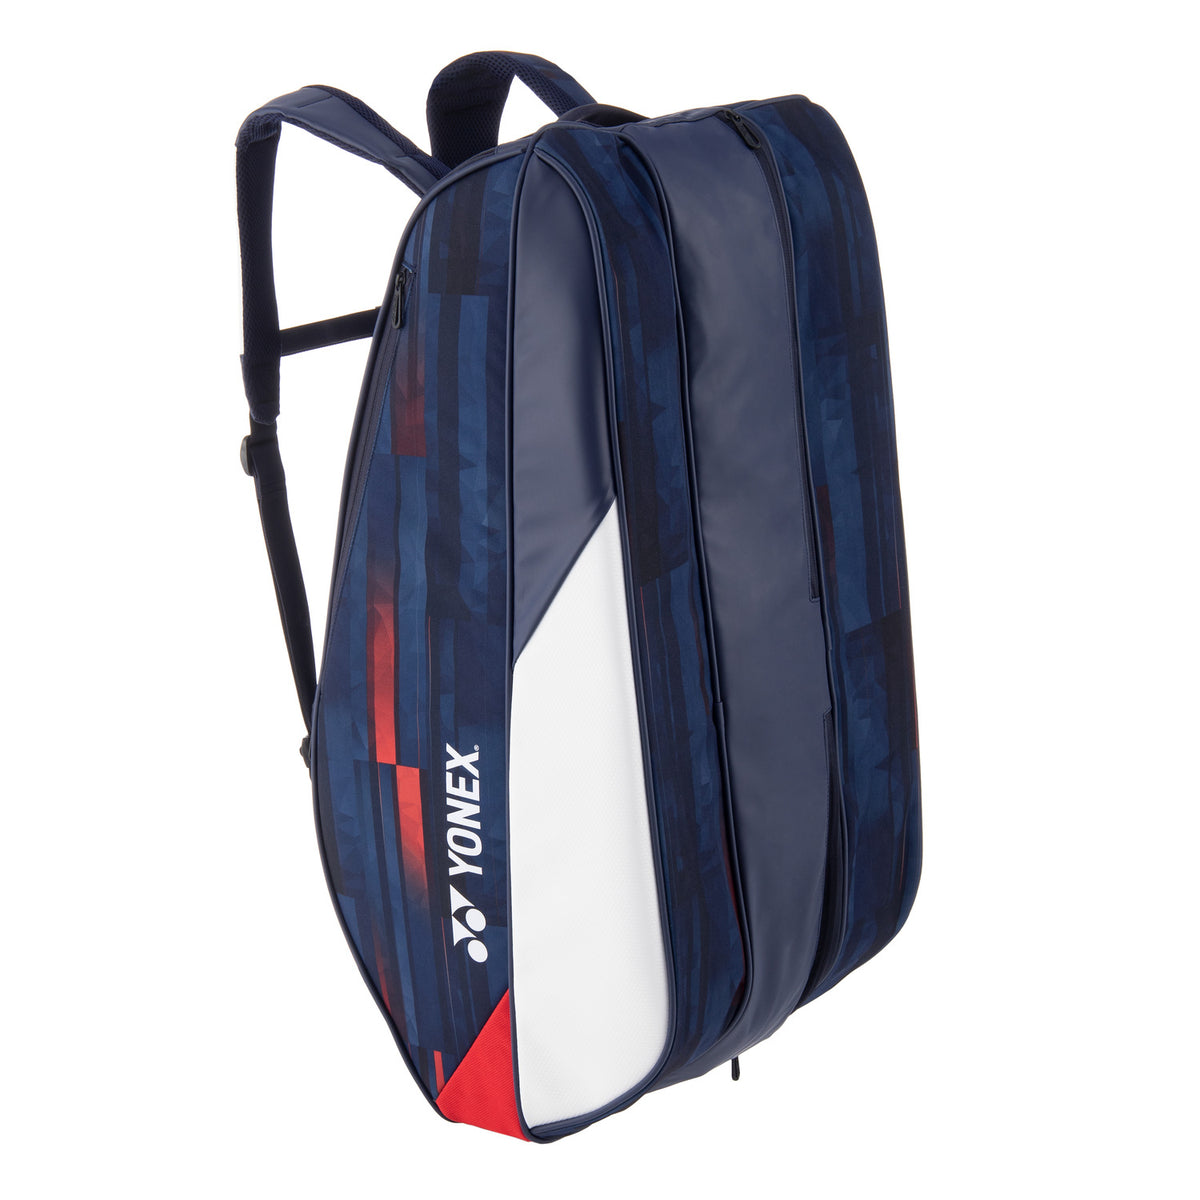 Yonex BA29PAEX Limited Pro 9 Racket Bag (White/Navy/Red)